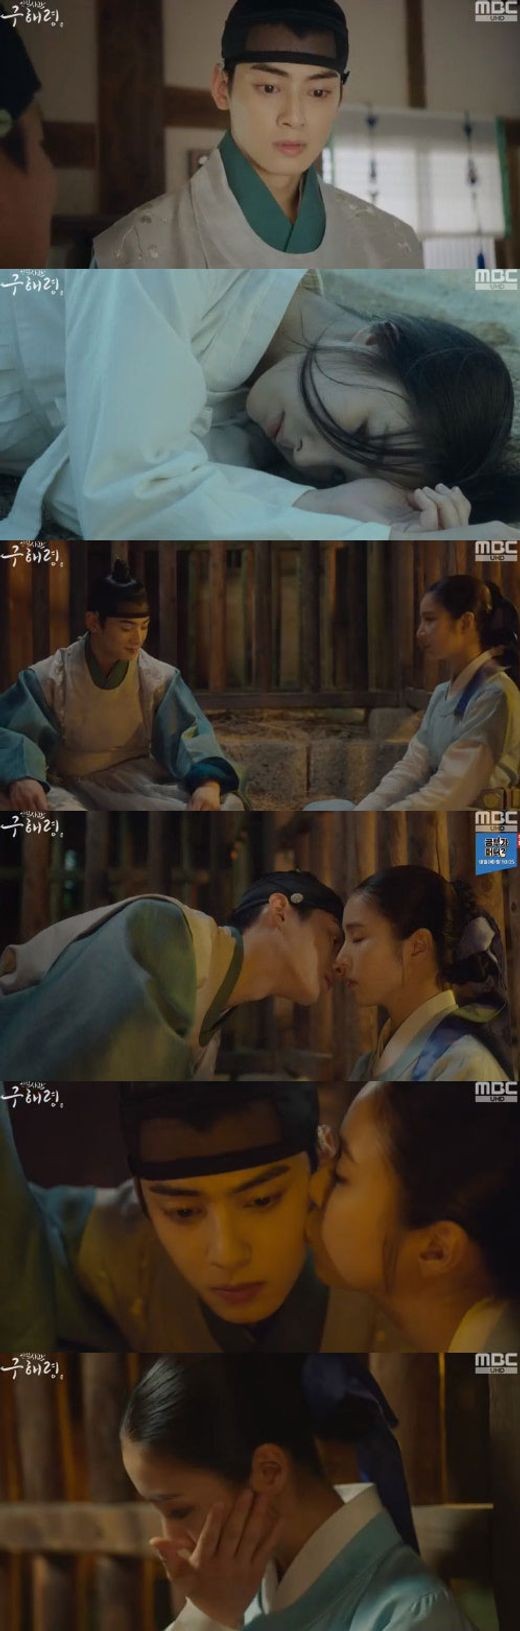 Shin Se-kyung confirmed his love with Cha Eun-woo and raised his animosity index.On the 21st, MBCs Rookie Historian Goo Hae-ryung broadcast a story about the ripe love with Lee Rim (Cha Eun-woo) in the Danger of Rookie Historian Goo Hae-ryung.Rookie Historian Goo Hae-ryung was caught secretly listening to the conversation between the king (Kim Min-sang) and the left-wing leader, Ikpyeong (Choi Deok-moon) and became trapped in By now.The king sent the officials to bring the municipal government, and the officials of the court tried to keep the municipal government by fighting.When Rookie Historian Goo Hae-ryung found out that he was trapped in jade, he went to Rookie Historian Goo Hae-ryung.He packed up the necessary things in the jade and Rookie Historian Goo Hae-ryung was impressed by his appearance.Rookie Historian Goo Hae-ryung told Irim, Dont worry, I think you should be prepared to some extent, not to be a sin who has been brought to By now against the name.We will be punished for being kicked out of the palace or for being kicked out of Hanyang, he said.Lee said, I will go with you. He said he would always be with Rookie Historian Goo Hae-ryung.If you go out to the palace and live next door to your house and go to Guiyang, Ill follow you and if youre punished even more, Ill take you away, he said.He told Na Hae-ryung, Whether it is a deep mountain or a remote island where no one lives.Hiding his moving heart, Rookie Historian Goo Hae-ryung said, I hate it. Mama knows nothing. I think I will do it from one to ten.I want to live alone in a sequel rather than just living with a pack. Lee said that it was not a burden but a treasure, and looked into the eyes of Rookie Historian Goo Hae-ryung and at the moment the two confirmed their love for each other.But just before the first kiss, the inner tube appeared and Irim could not hide his disappointment. Na Hae-ryung, who saw such a picture, kissed his cheek and showed love.In the meantime, Min Woo-won (Lee Ji-hoon) held an axe and raised a branch office to condemn the kings actions. The officials of the presiding officer also appealed to him that the kings actions were not right.Eventually, the king said he would take the name and not touch the municipal government.On the same day, Rookie Historian Goo Hae-ryung went to Saga while Rookie Historian Goo Hae-ryung was released safely, and Koo Jae-kyung (Fairy Hwan) said, Stop the temple.No one can be safe in the palace, and it is the palace that becomes cruel to anyone whenever necessary. But Rookie Historian Goo Hae-ryung said he did not intend to quit his job, saying he would pay for it.However, on this day, the kings name was again given to Rookie Historian Goo Hae-ryung, raising the question of what kind of Danger Rookie Historian Goo Hae-ryung would be.